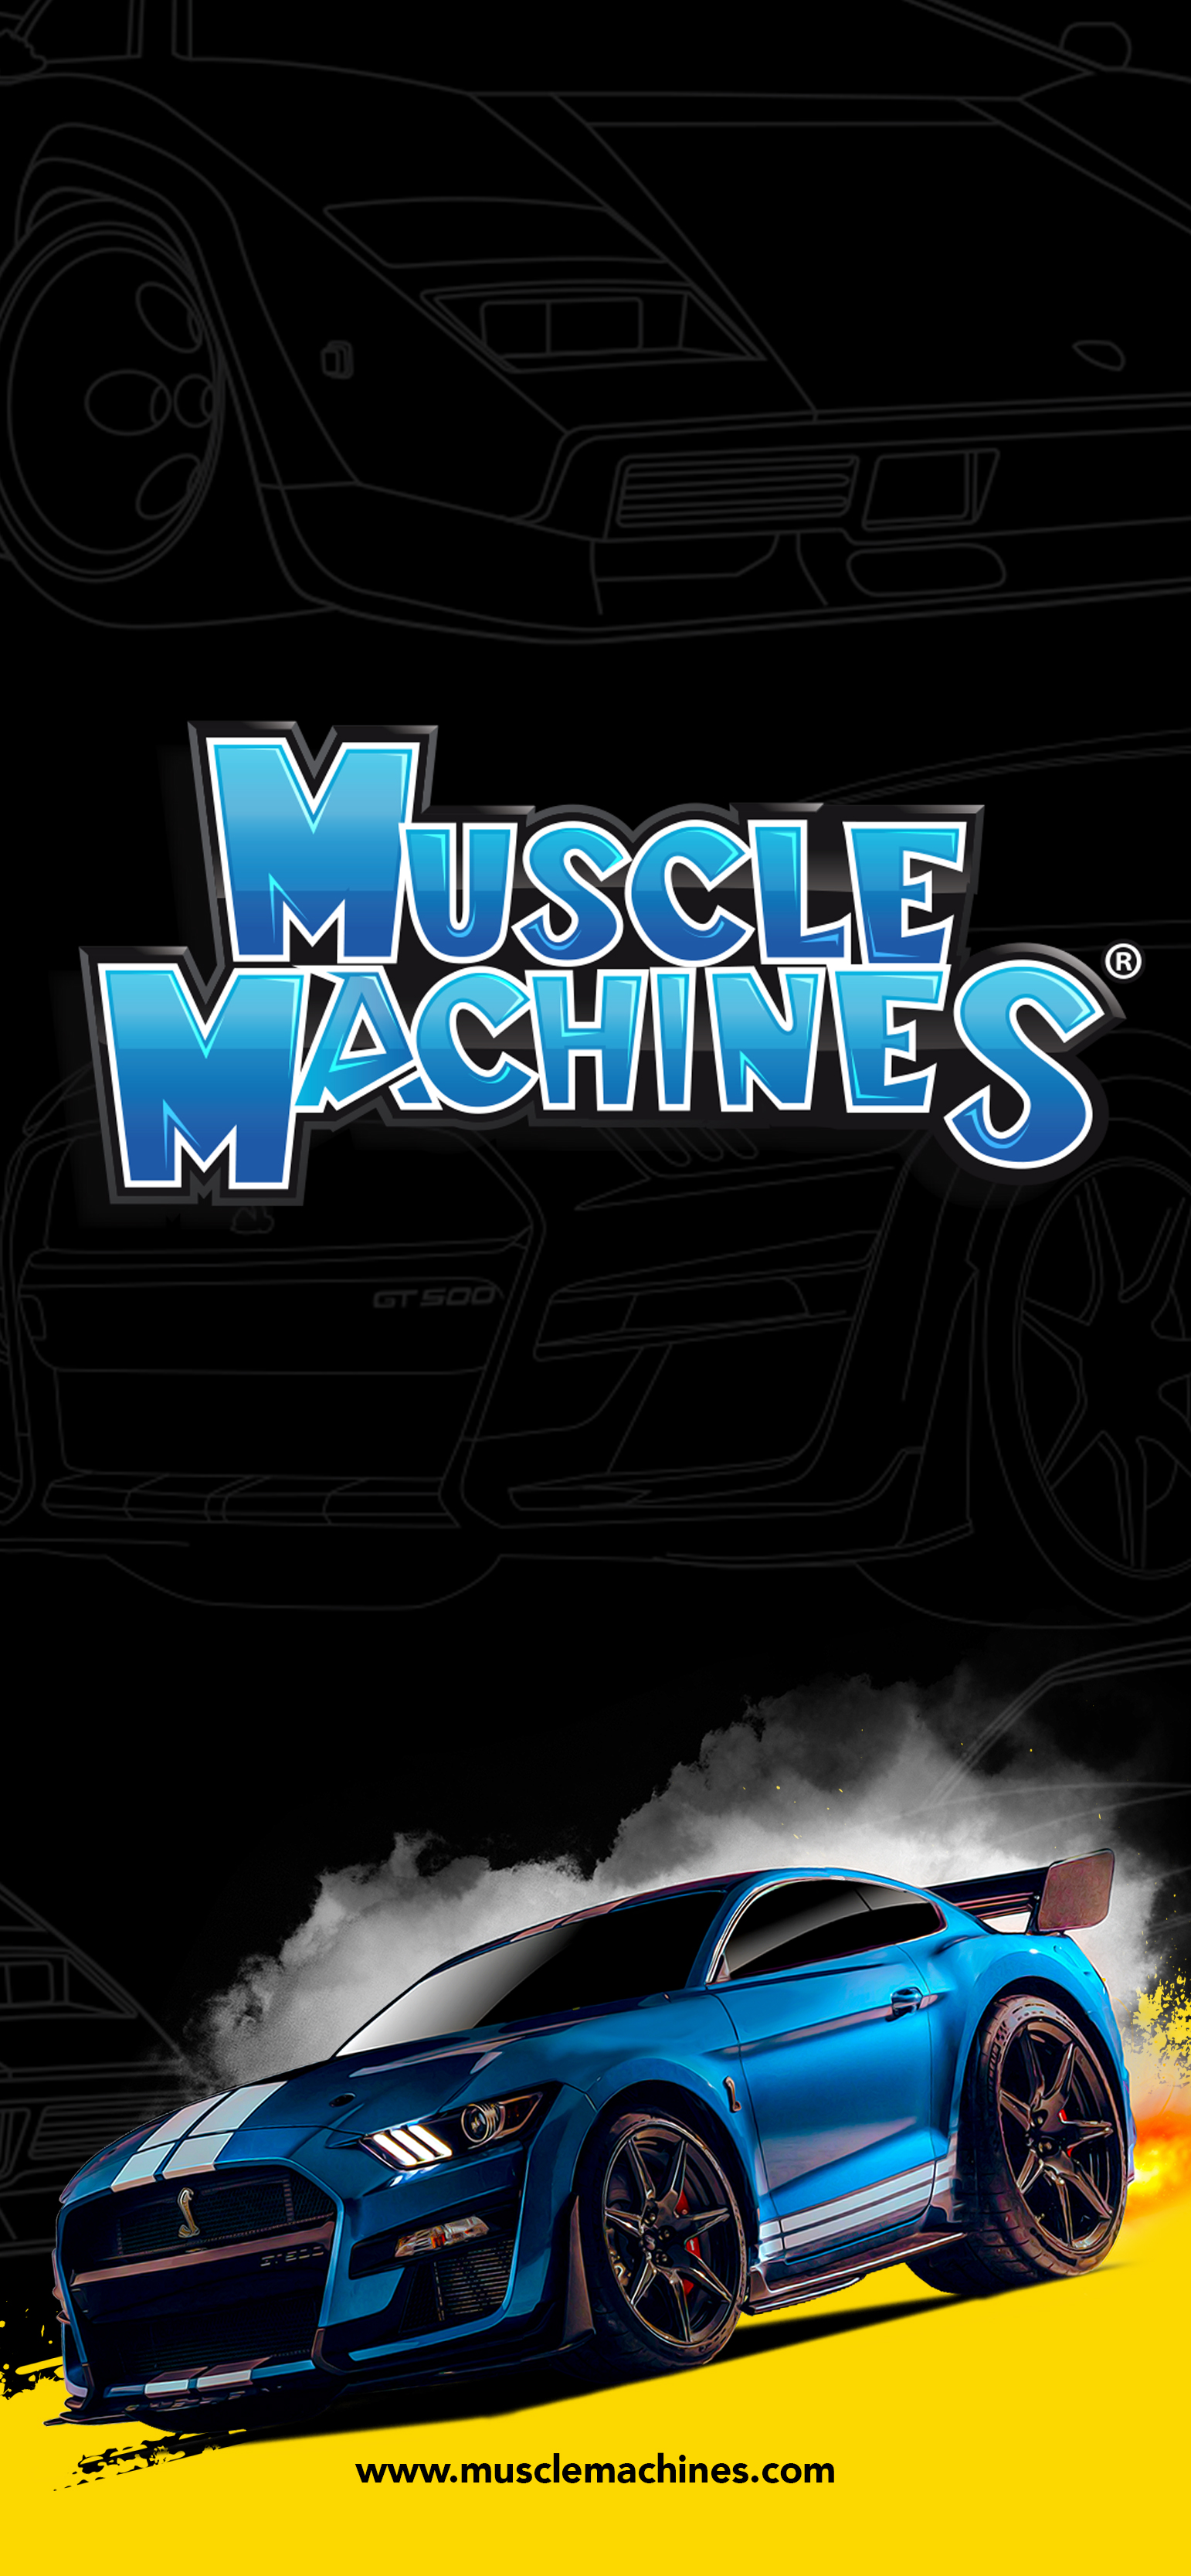 http://www.musclemachines.com/images/mm_phone_wallpaper.jpg